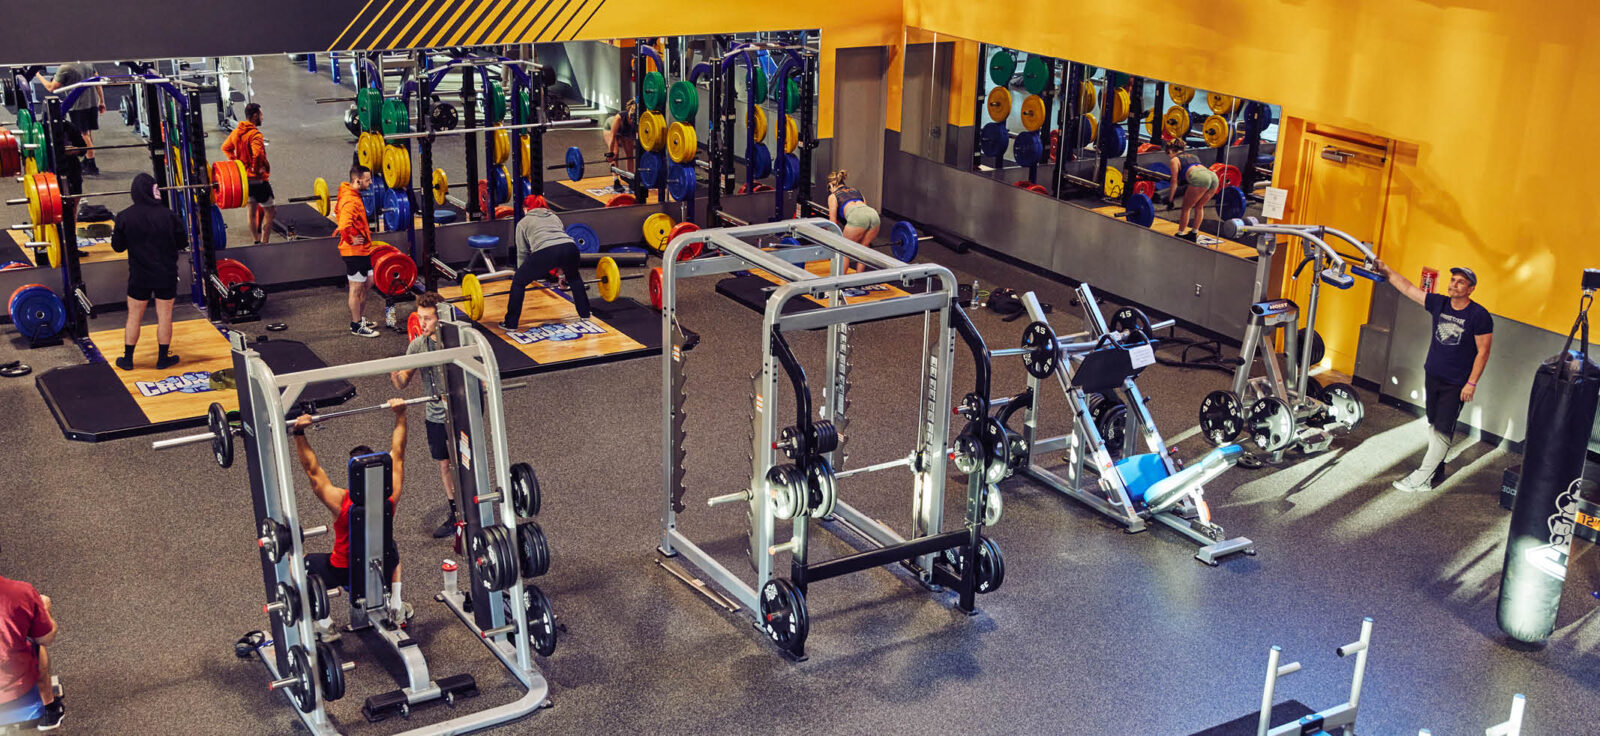 How Much is a Gym Membership: What to Expect from Every Price Point - Crunch